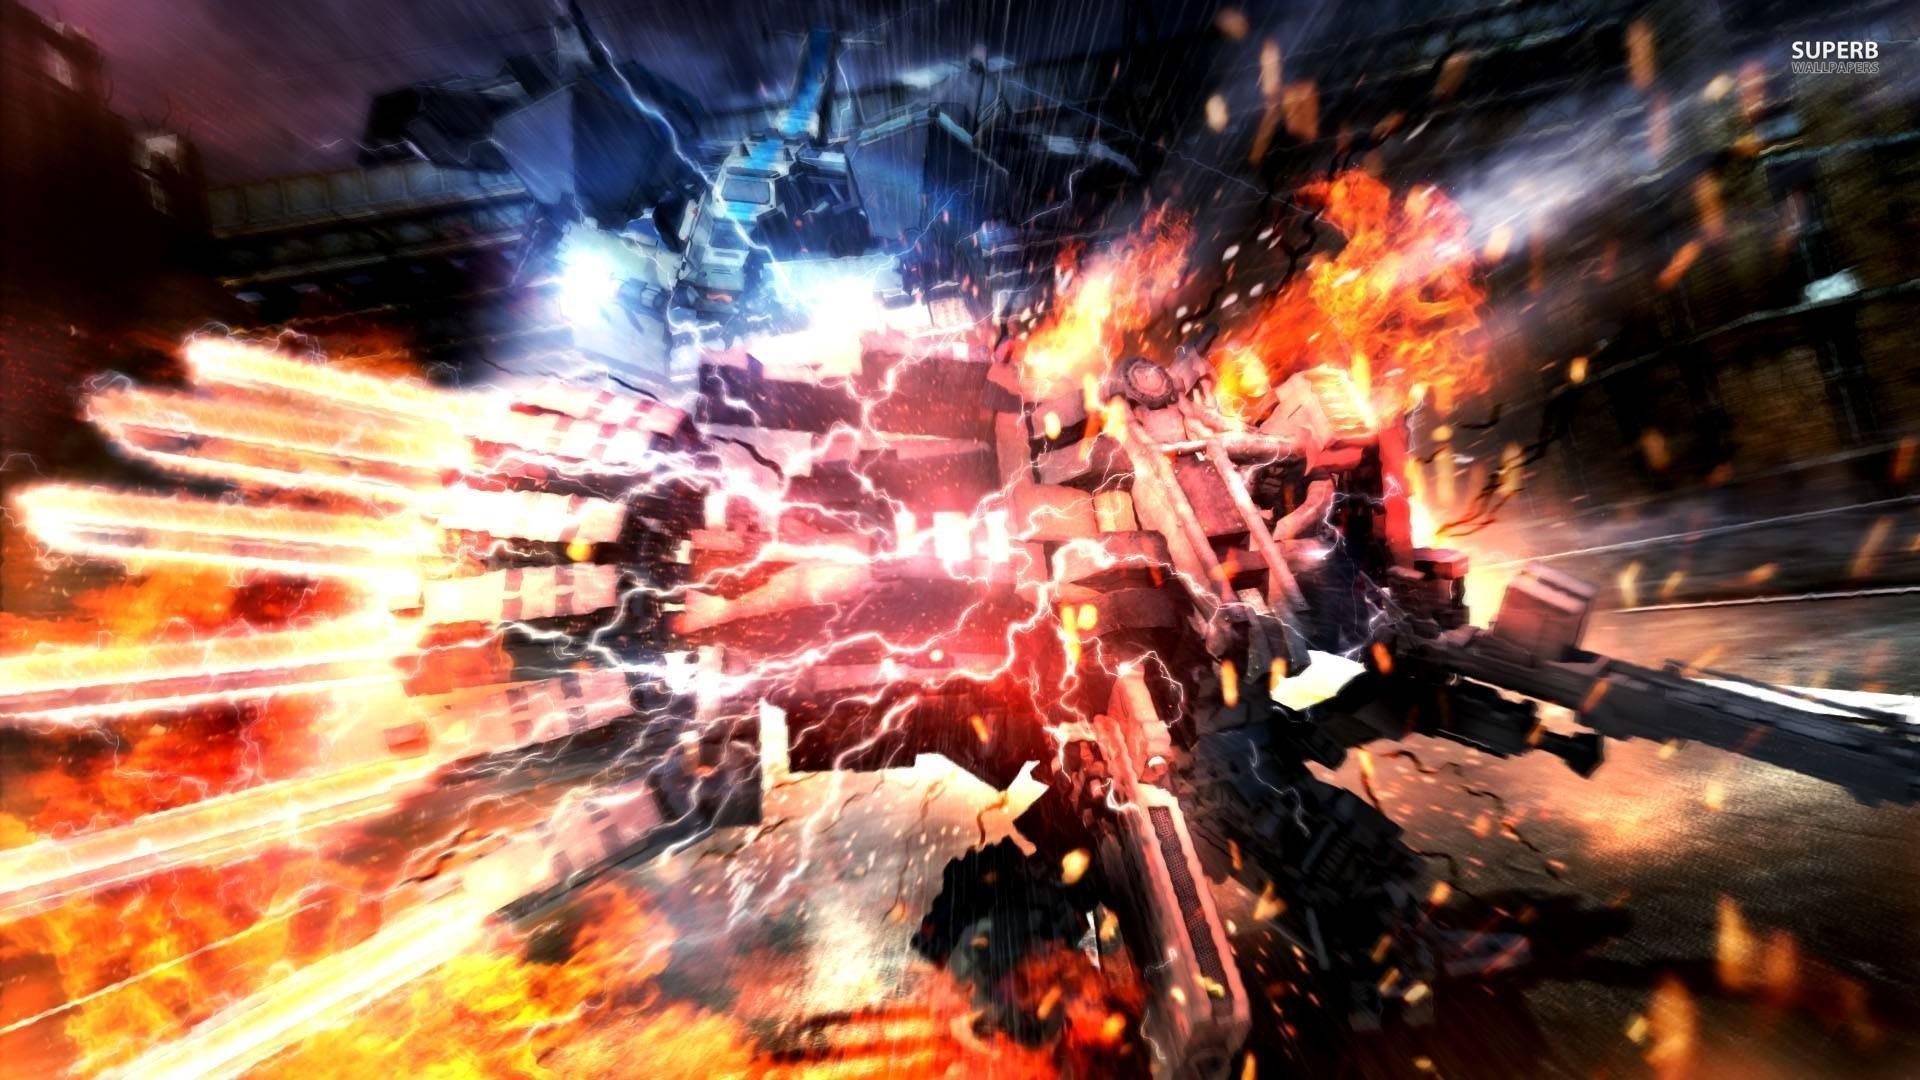 Amazing Background Wallpaper. Armored Core HD Wallpaper